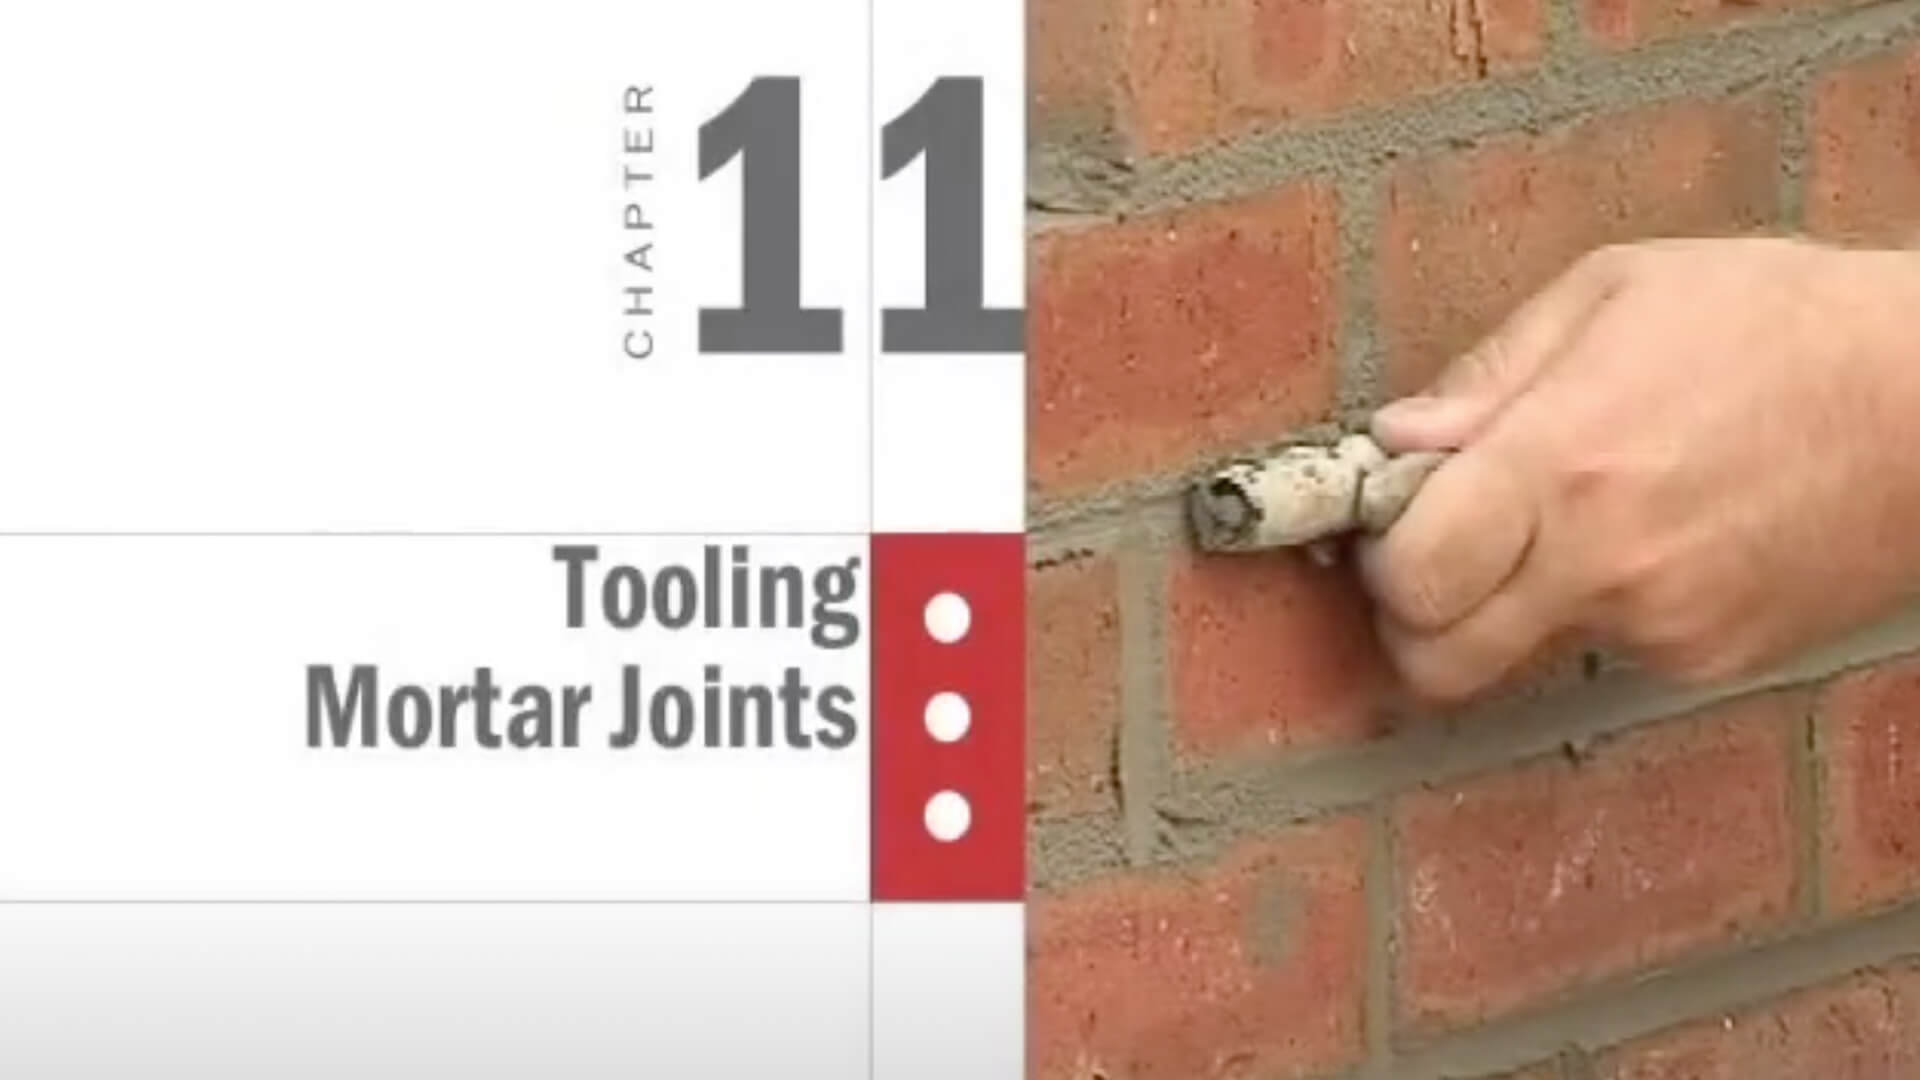 Tooling Mortar Joints